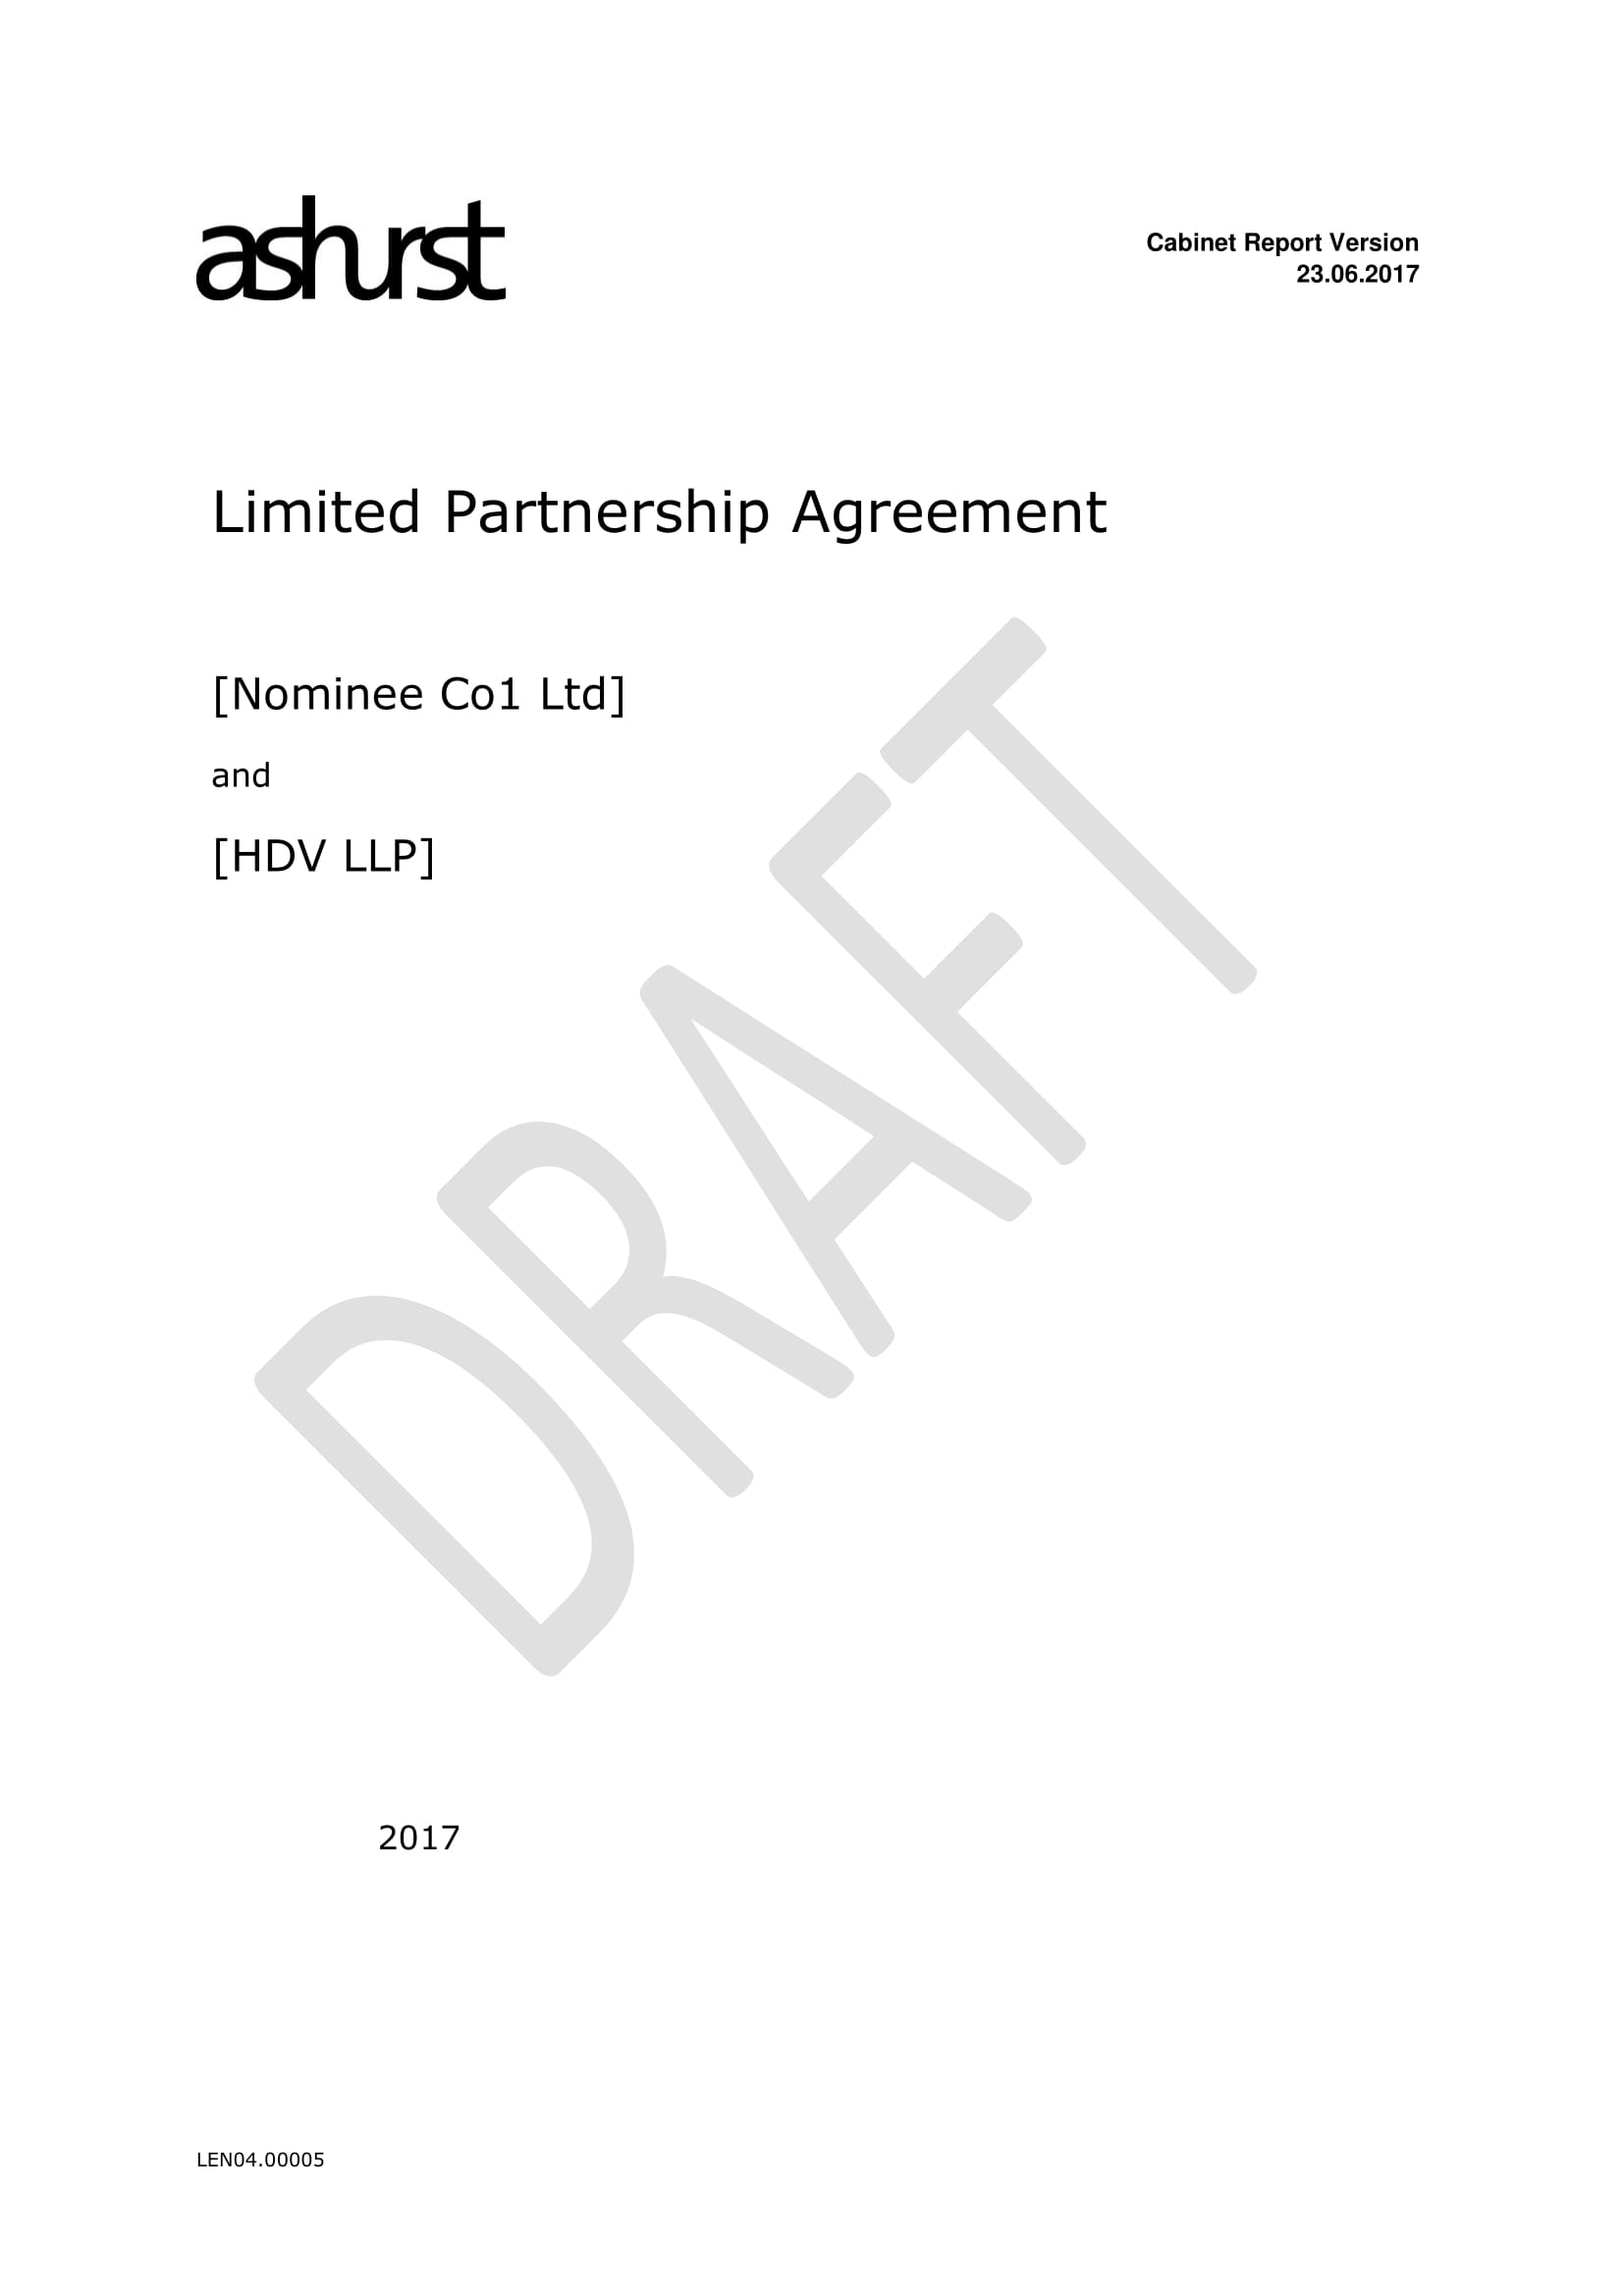 limited partnership agreement example